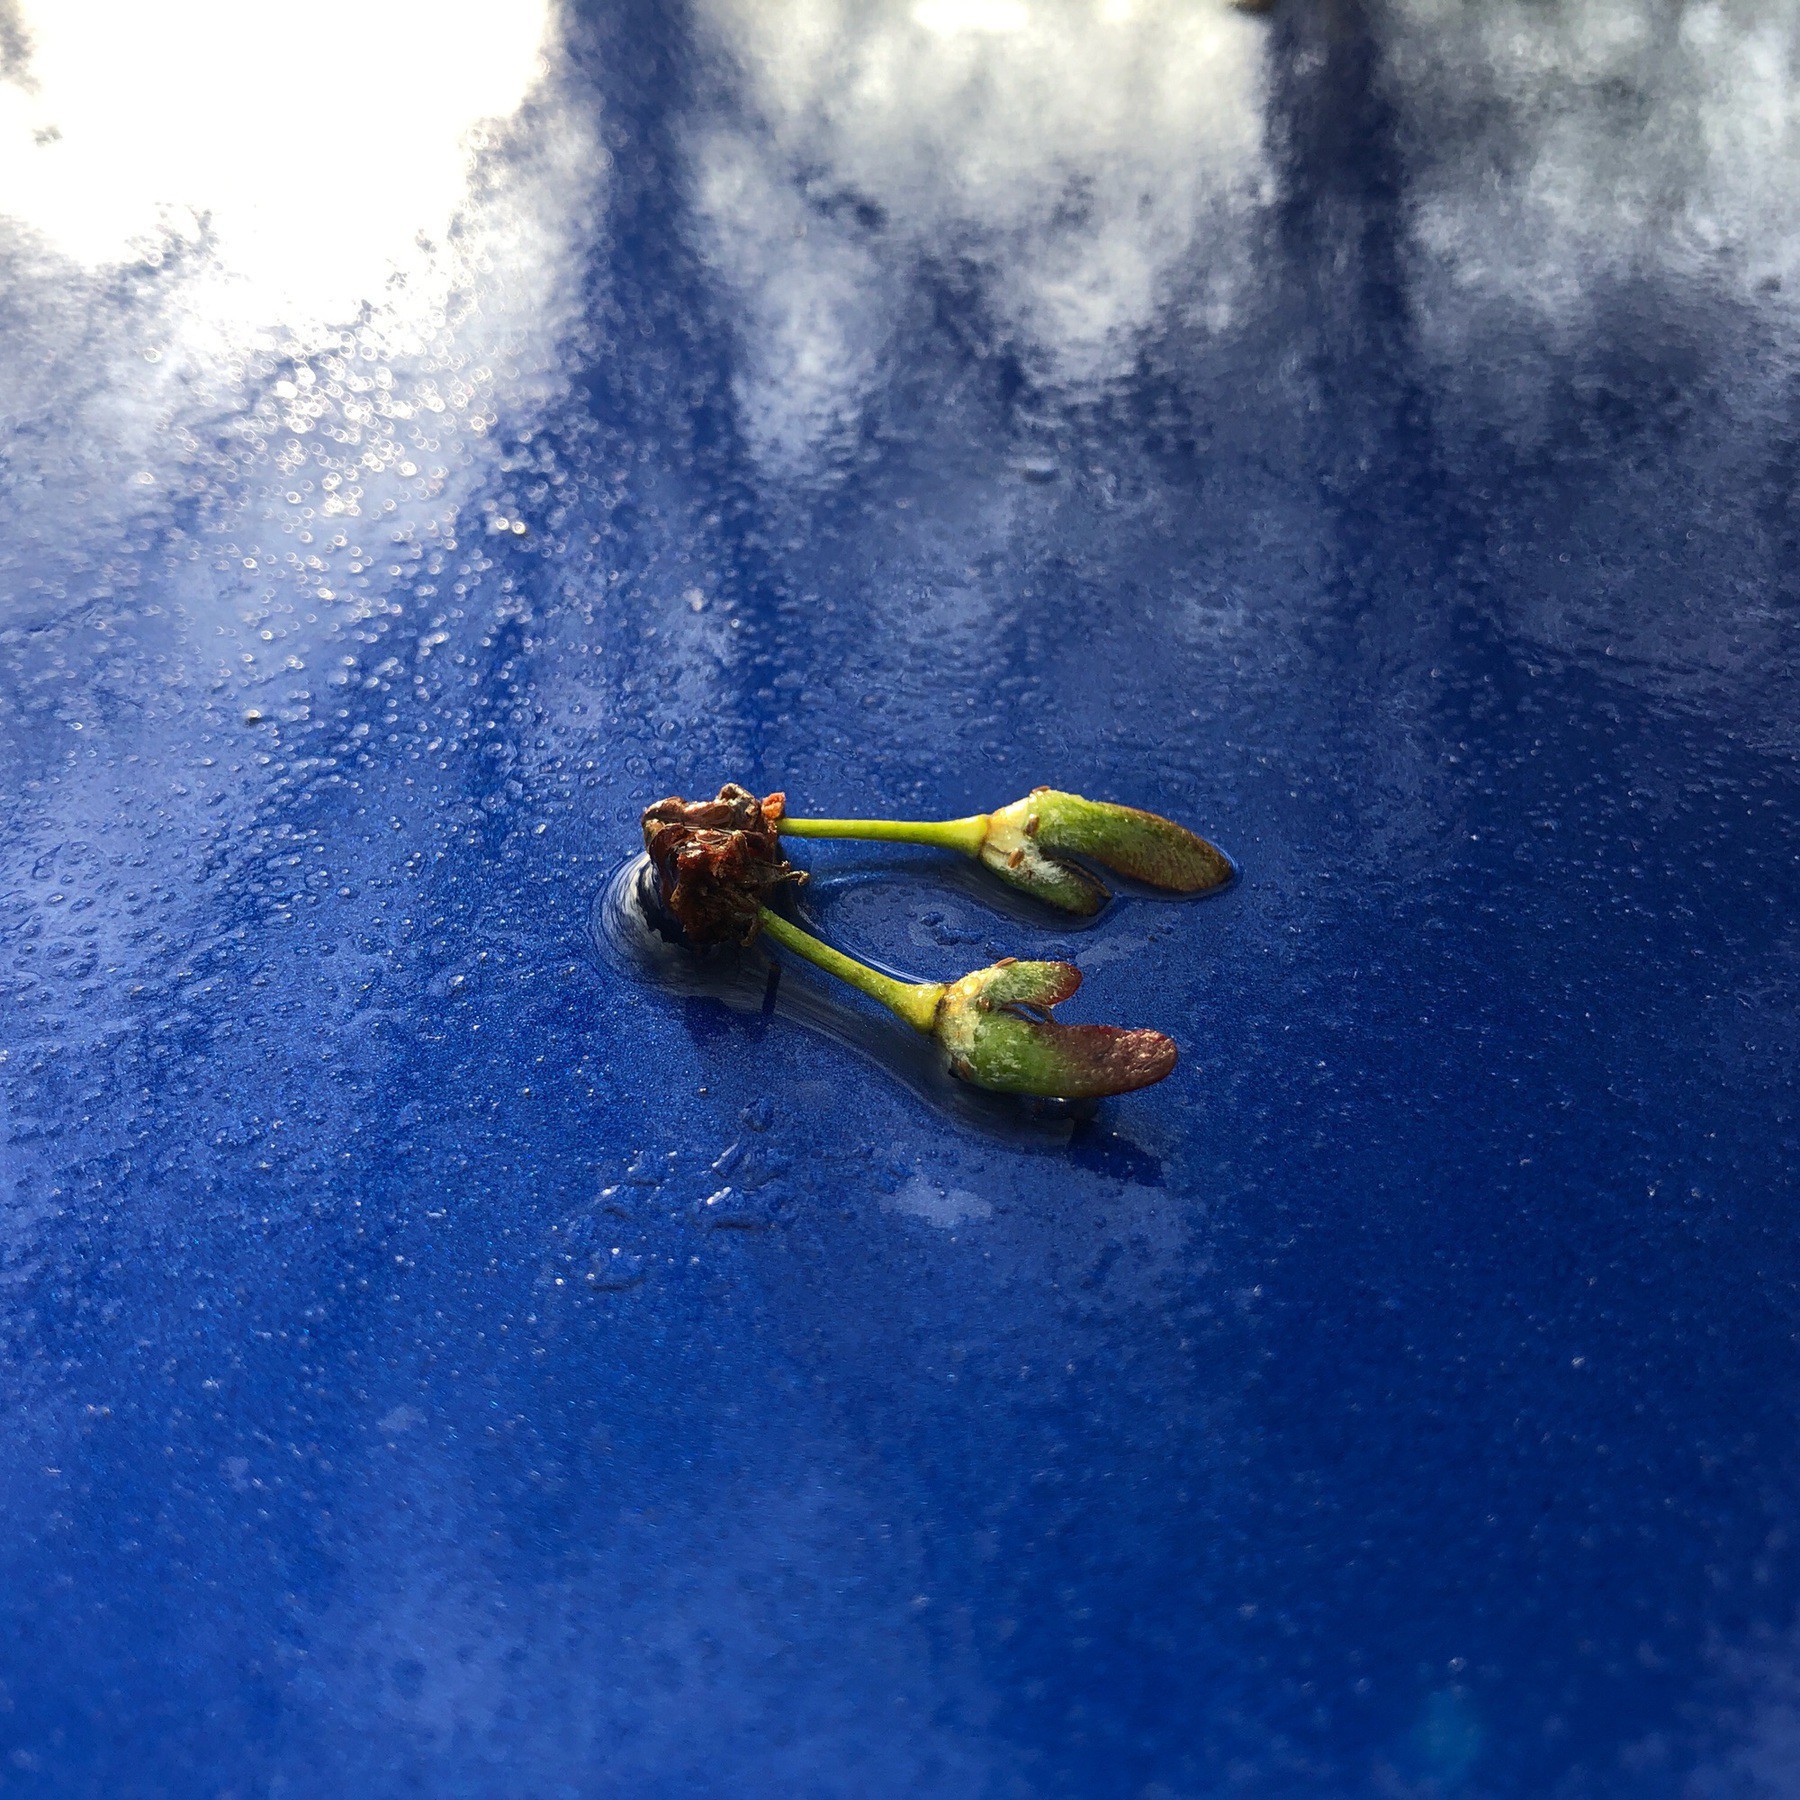 Seeds on top of car roof.